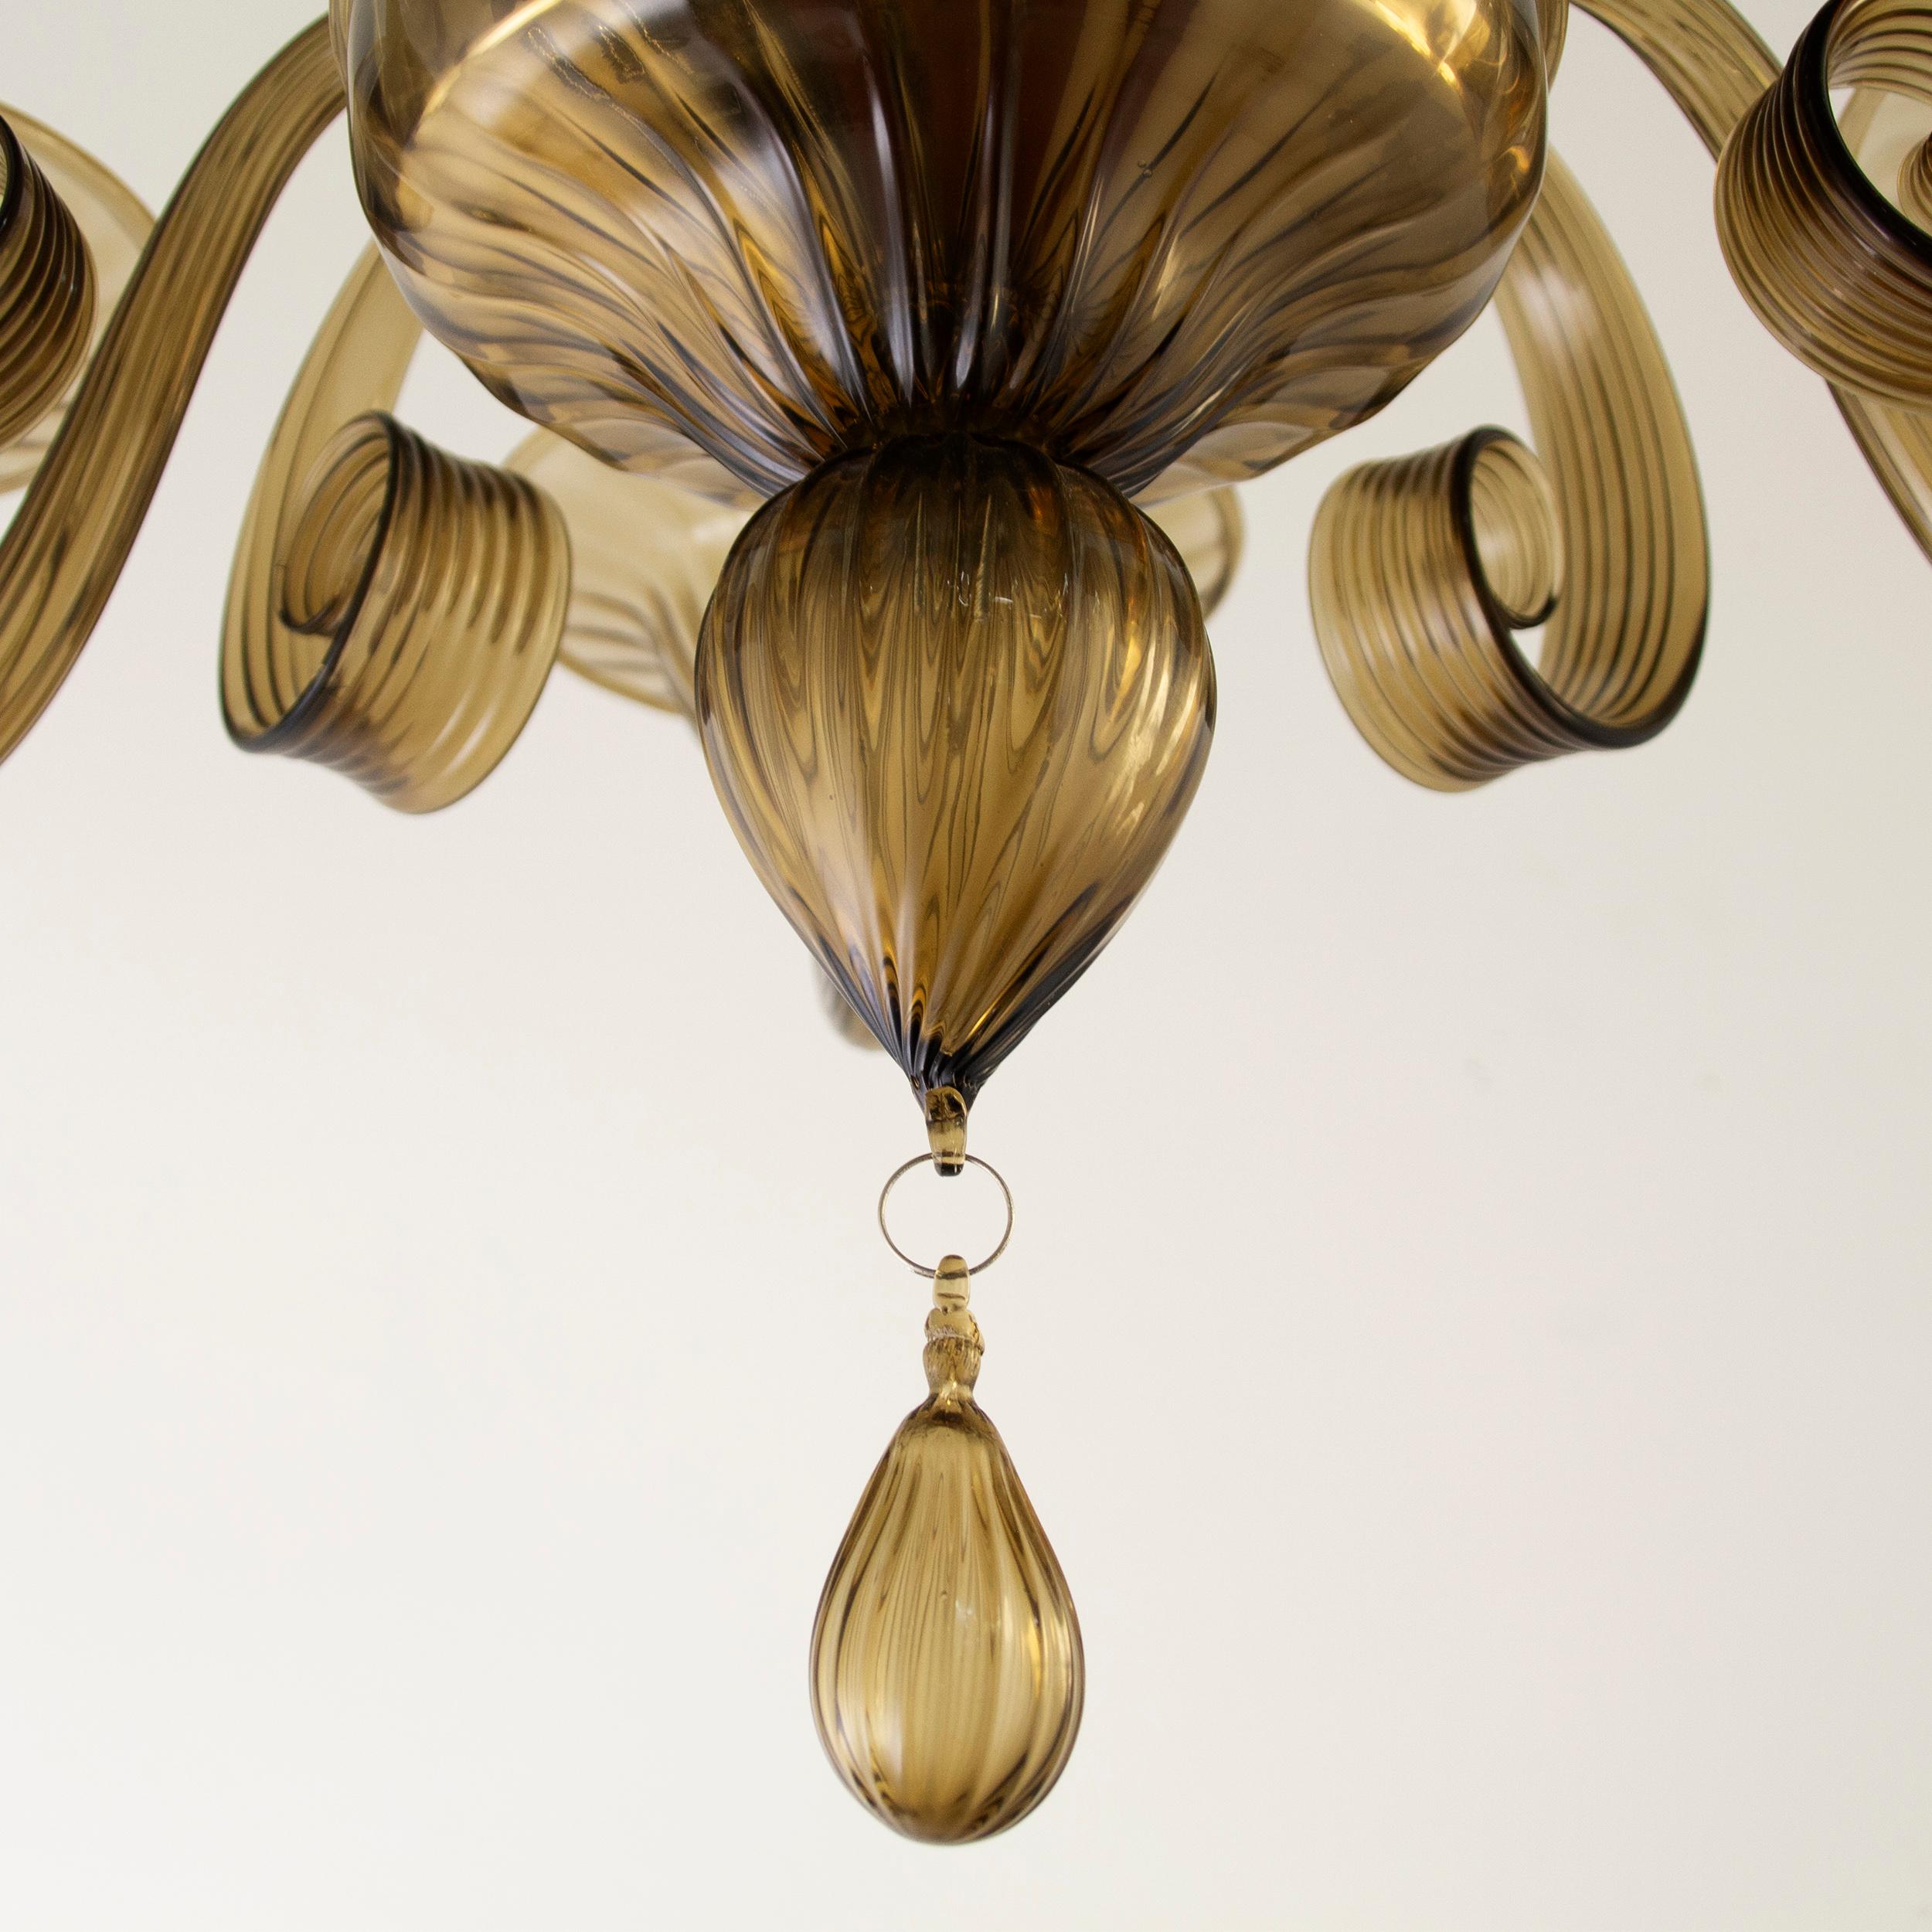 Hand-Crafted Capriccio Chandelier 6 Arms Moka Artistic Murano Glass by Multiforme in Stock For Sale